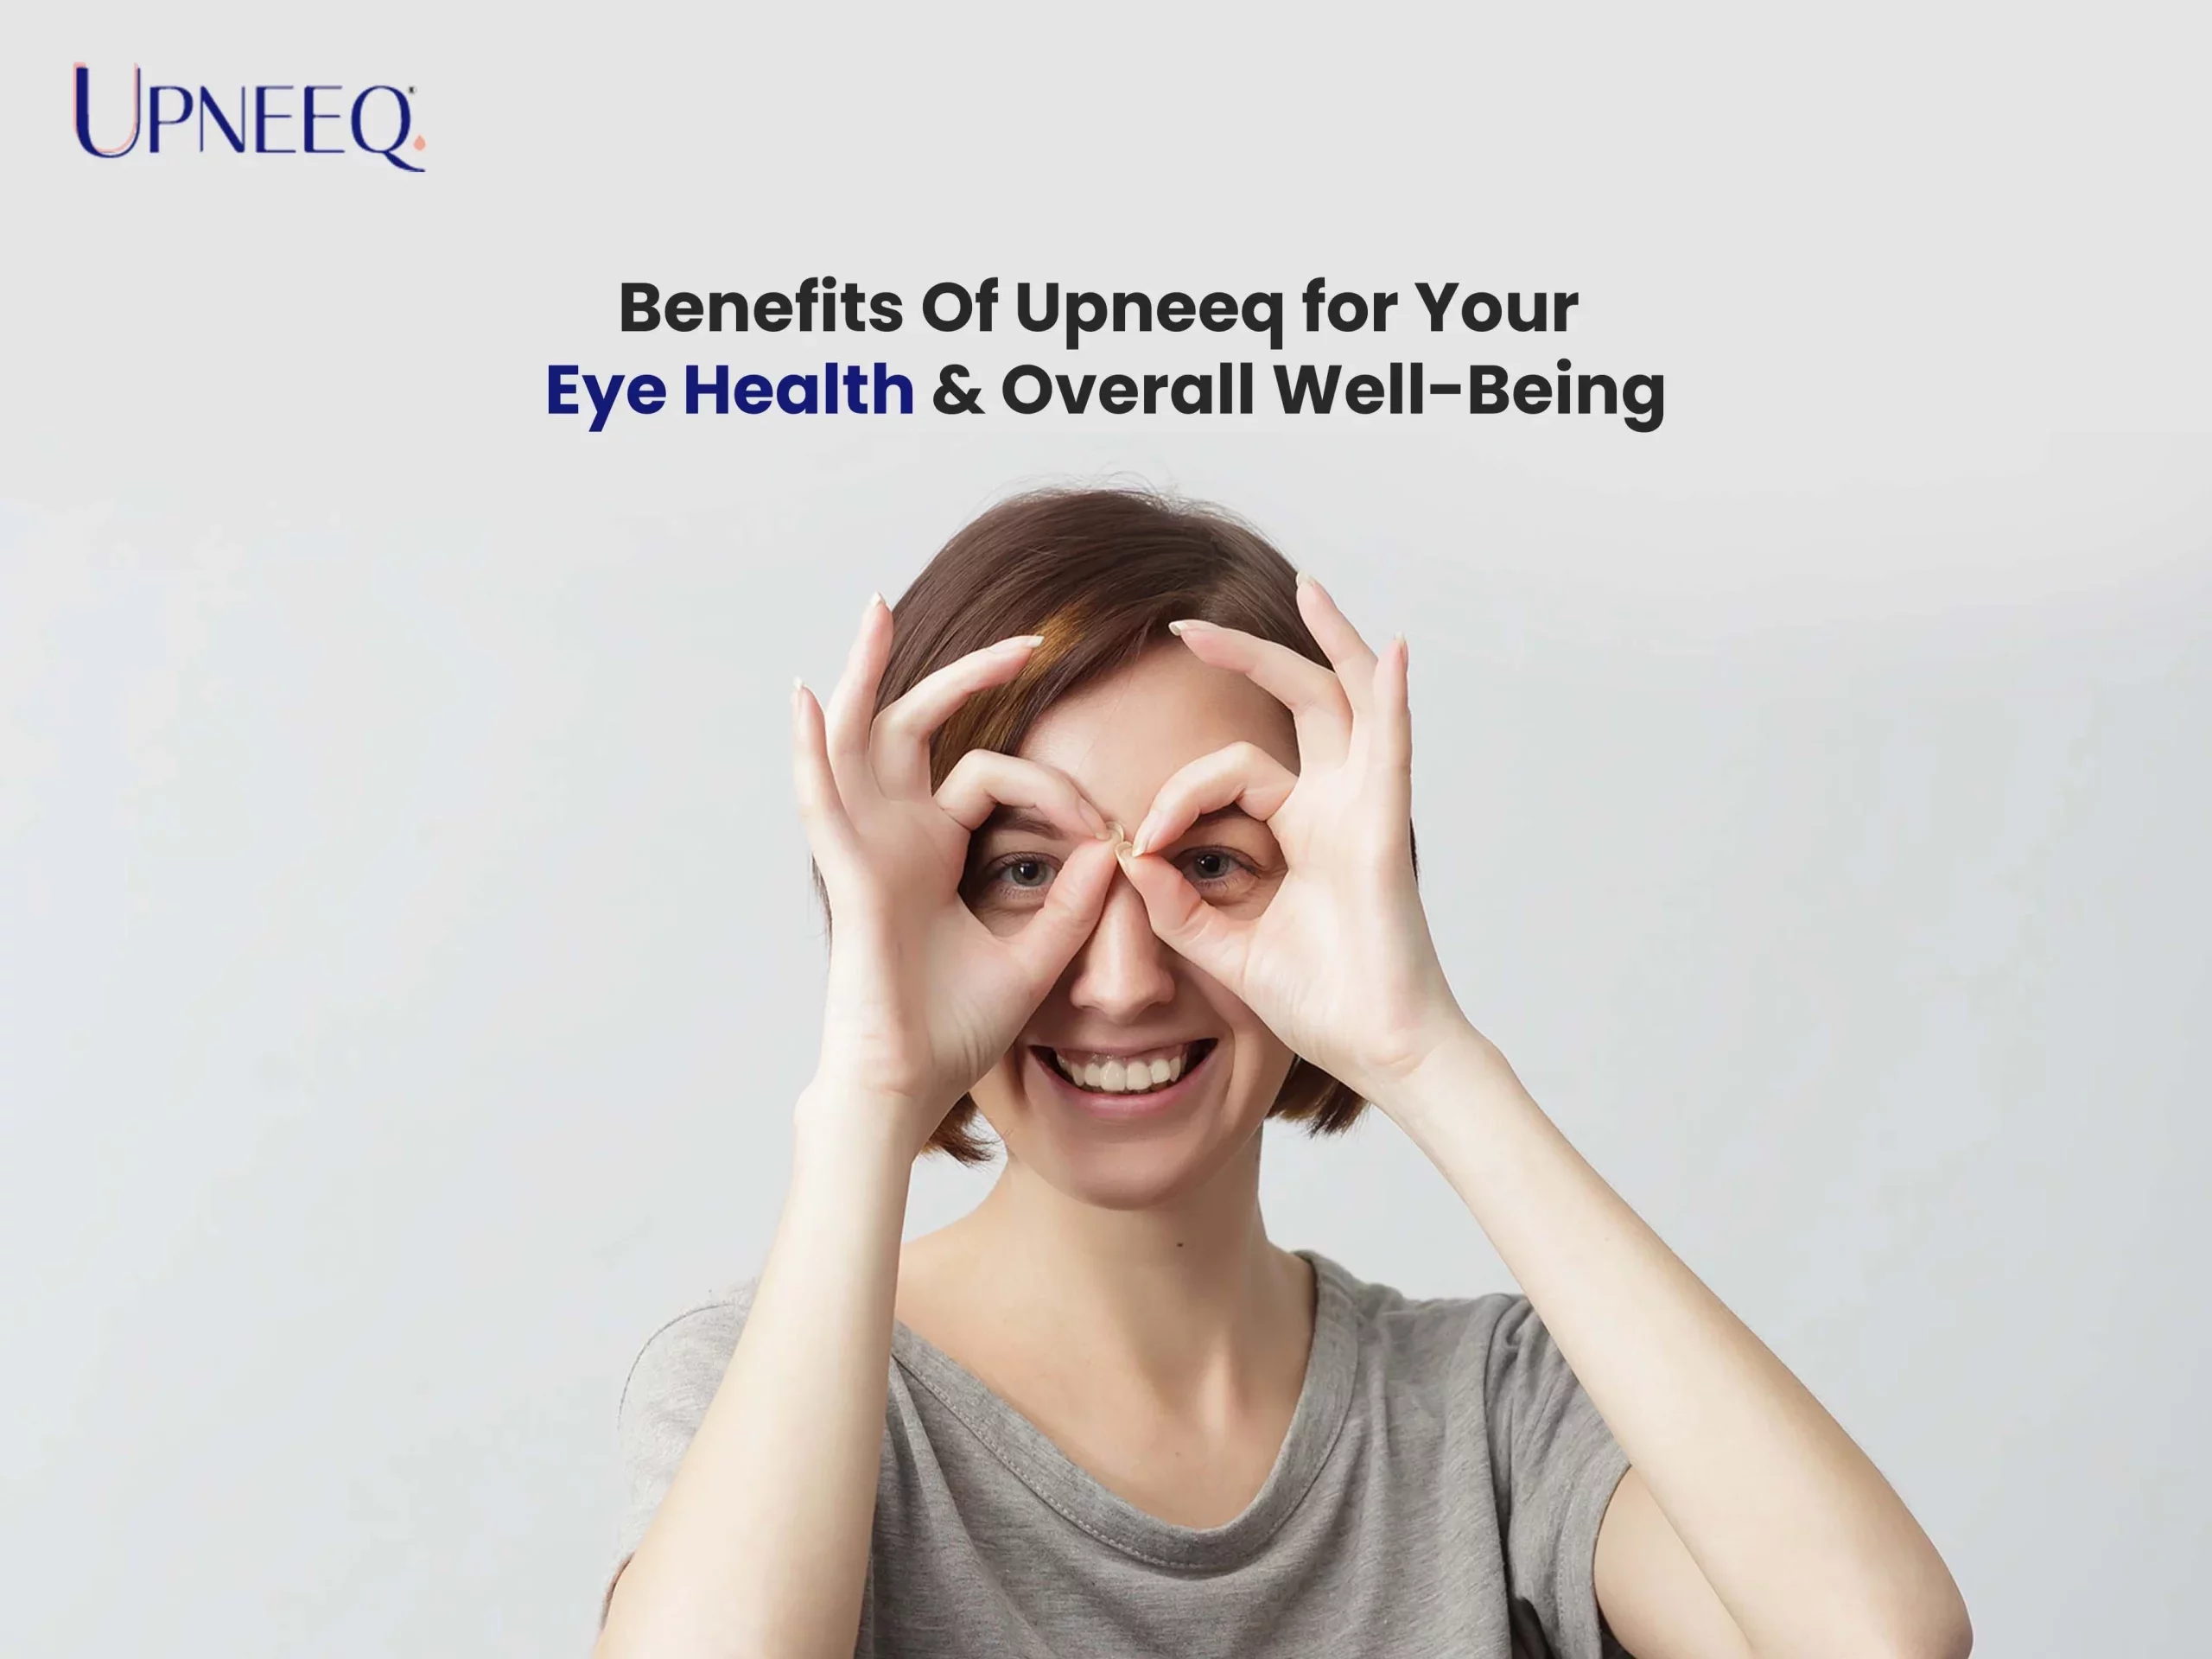 Benefits Of Upneeq for Your Eye Health & Overall Well-Being